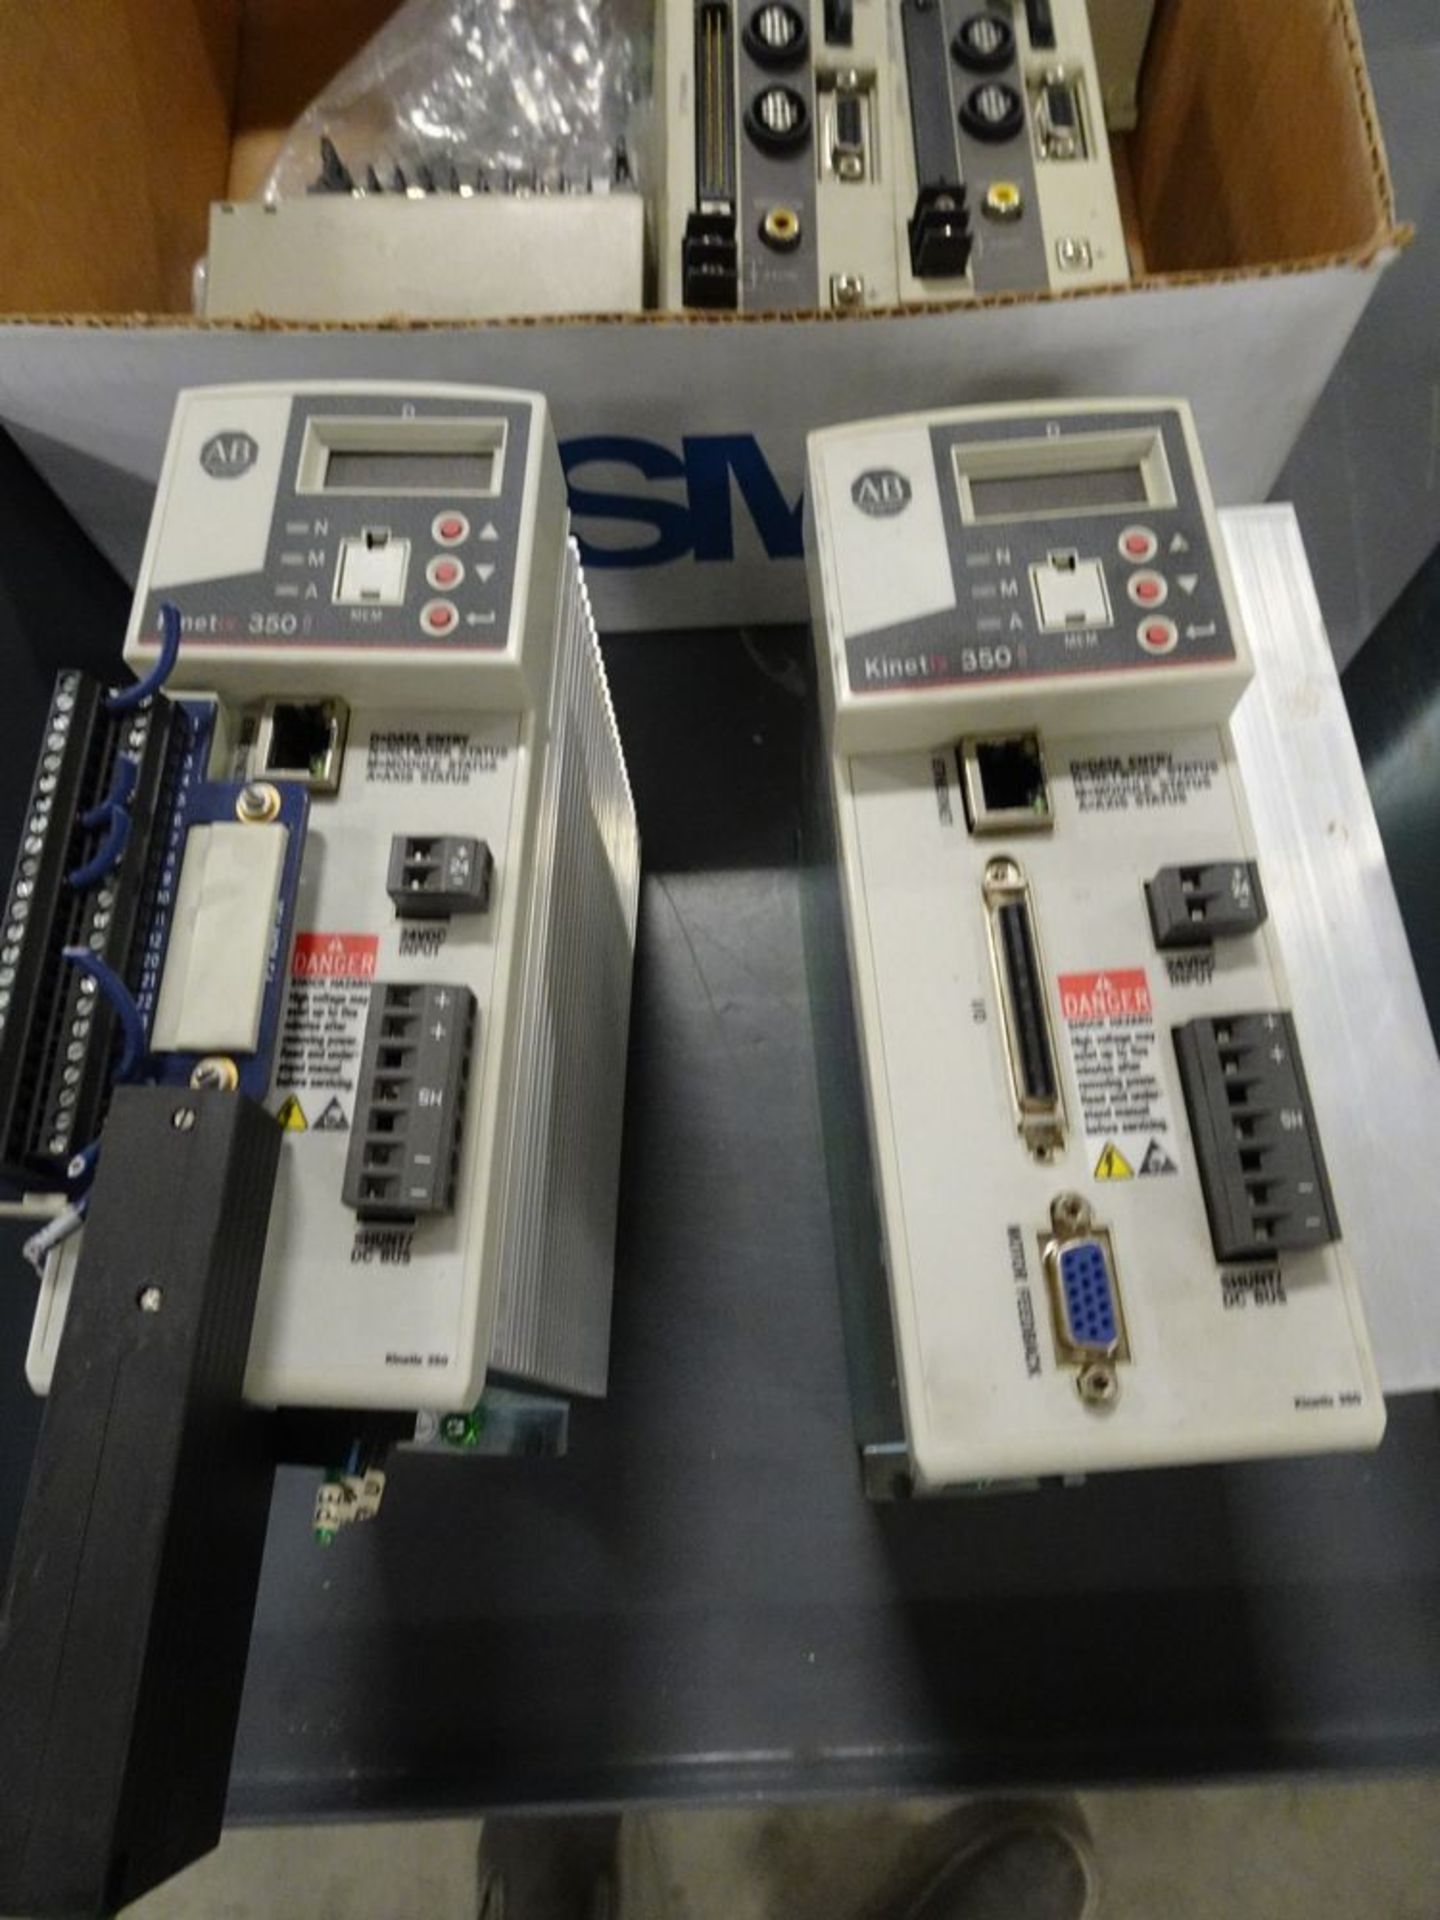 ASSORTED PRODUCT, ALLEN-BRADLEY SWITCHES, POWERFLEX DRIVES, ETC. - Image 4 of 6